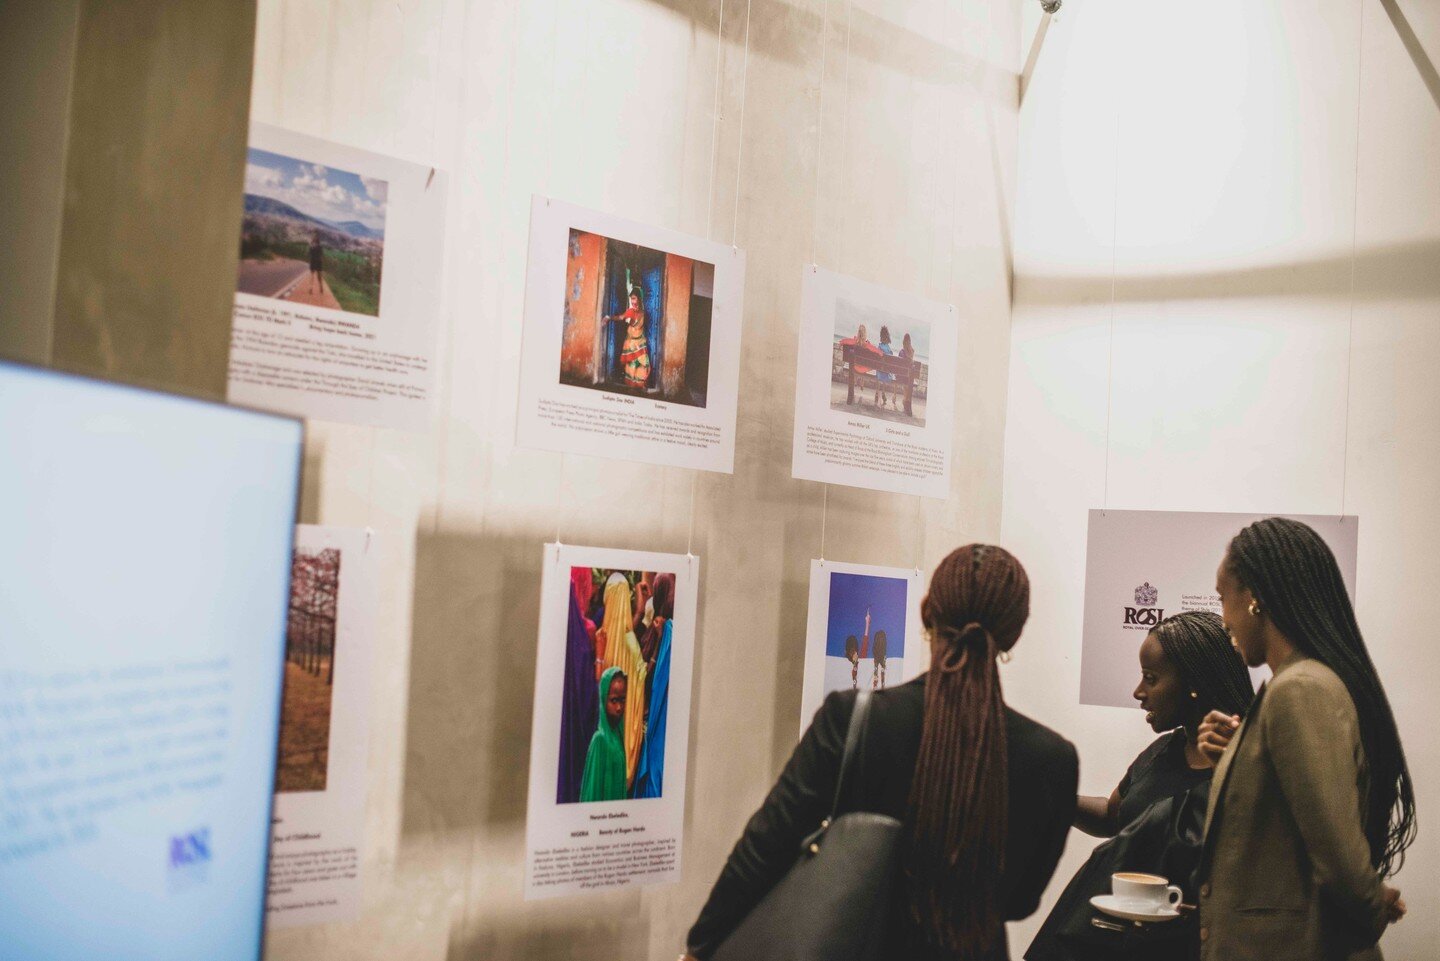 Special thanks to @ROSLarts for trusting us with the exhibition of the winning photography from their 2019 ROSL Photography Competition. The exhibition enriched the experience of visitors to the Commonwealth Marketplace. #RFW2022 #CollectiveRW